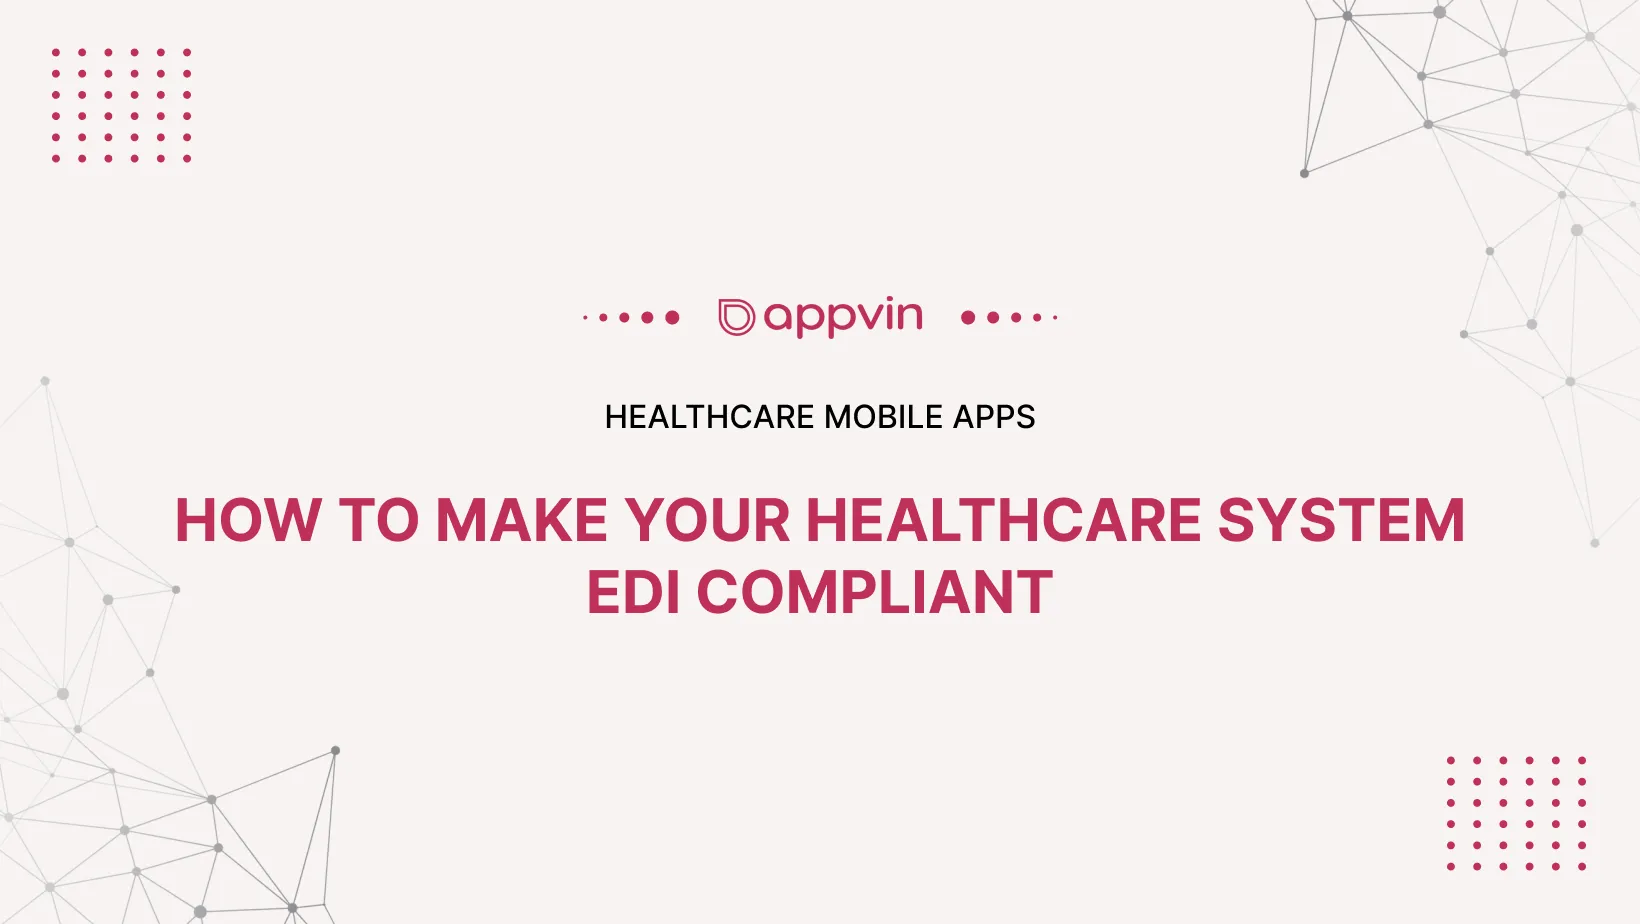 How to Make Your Healthcare System EDI Compliant